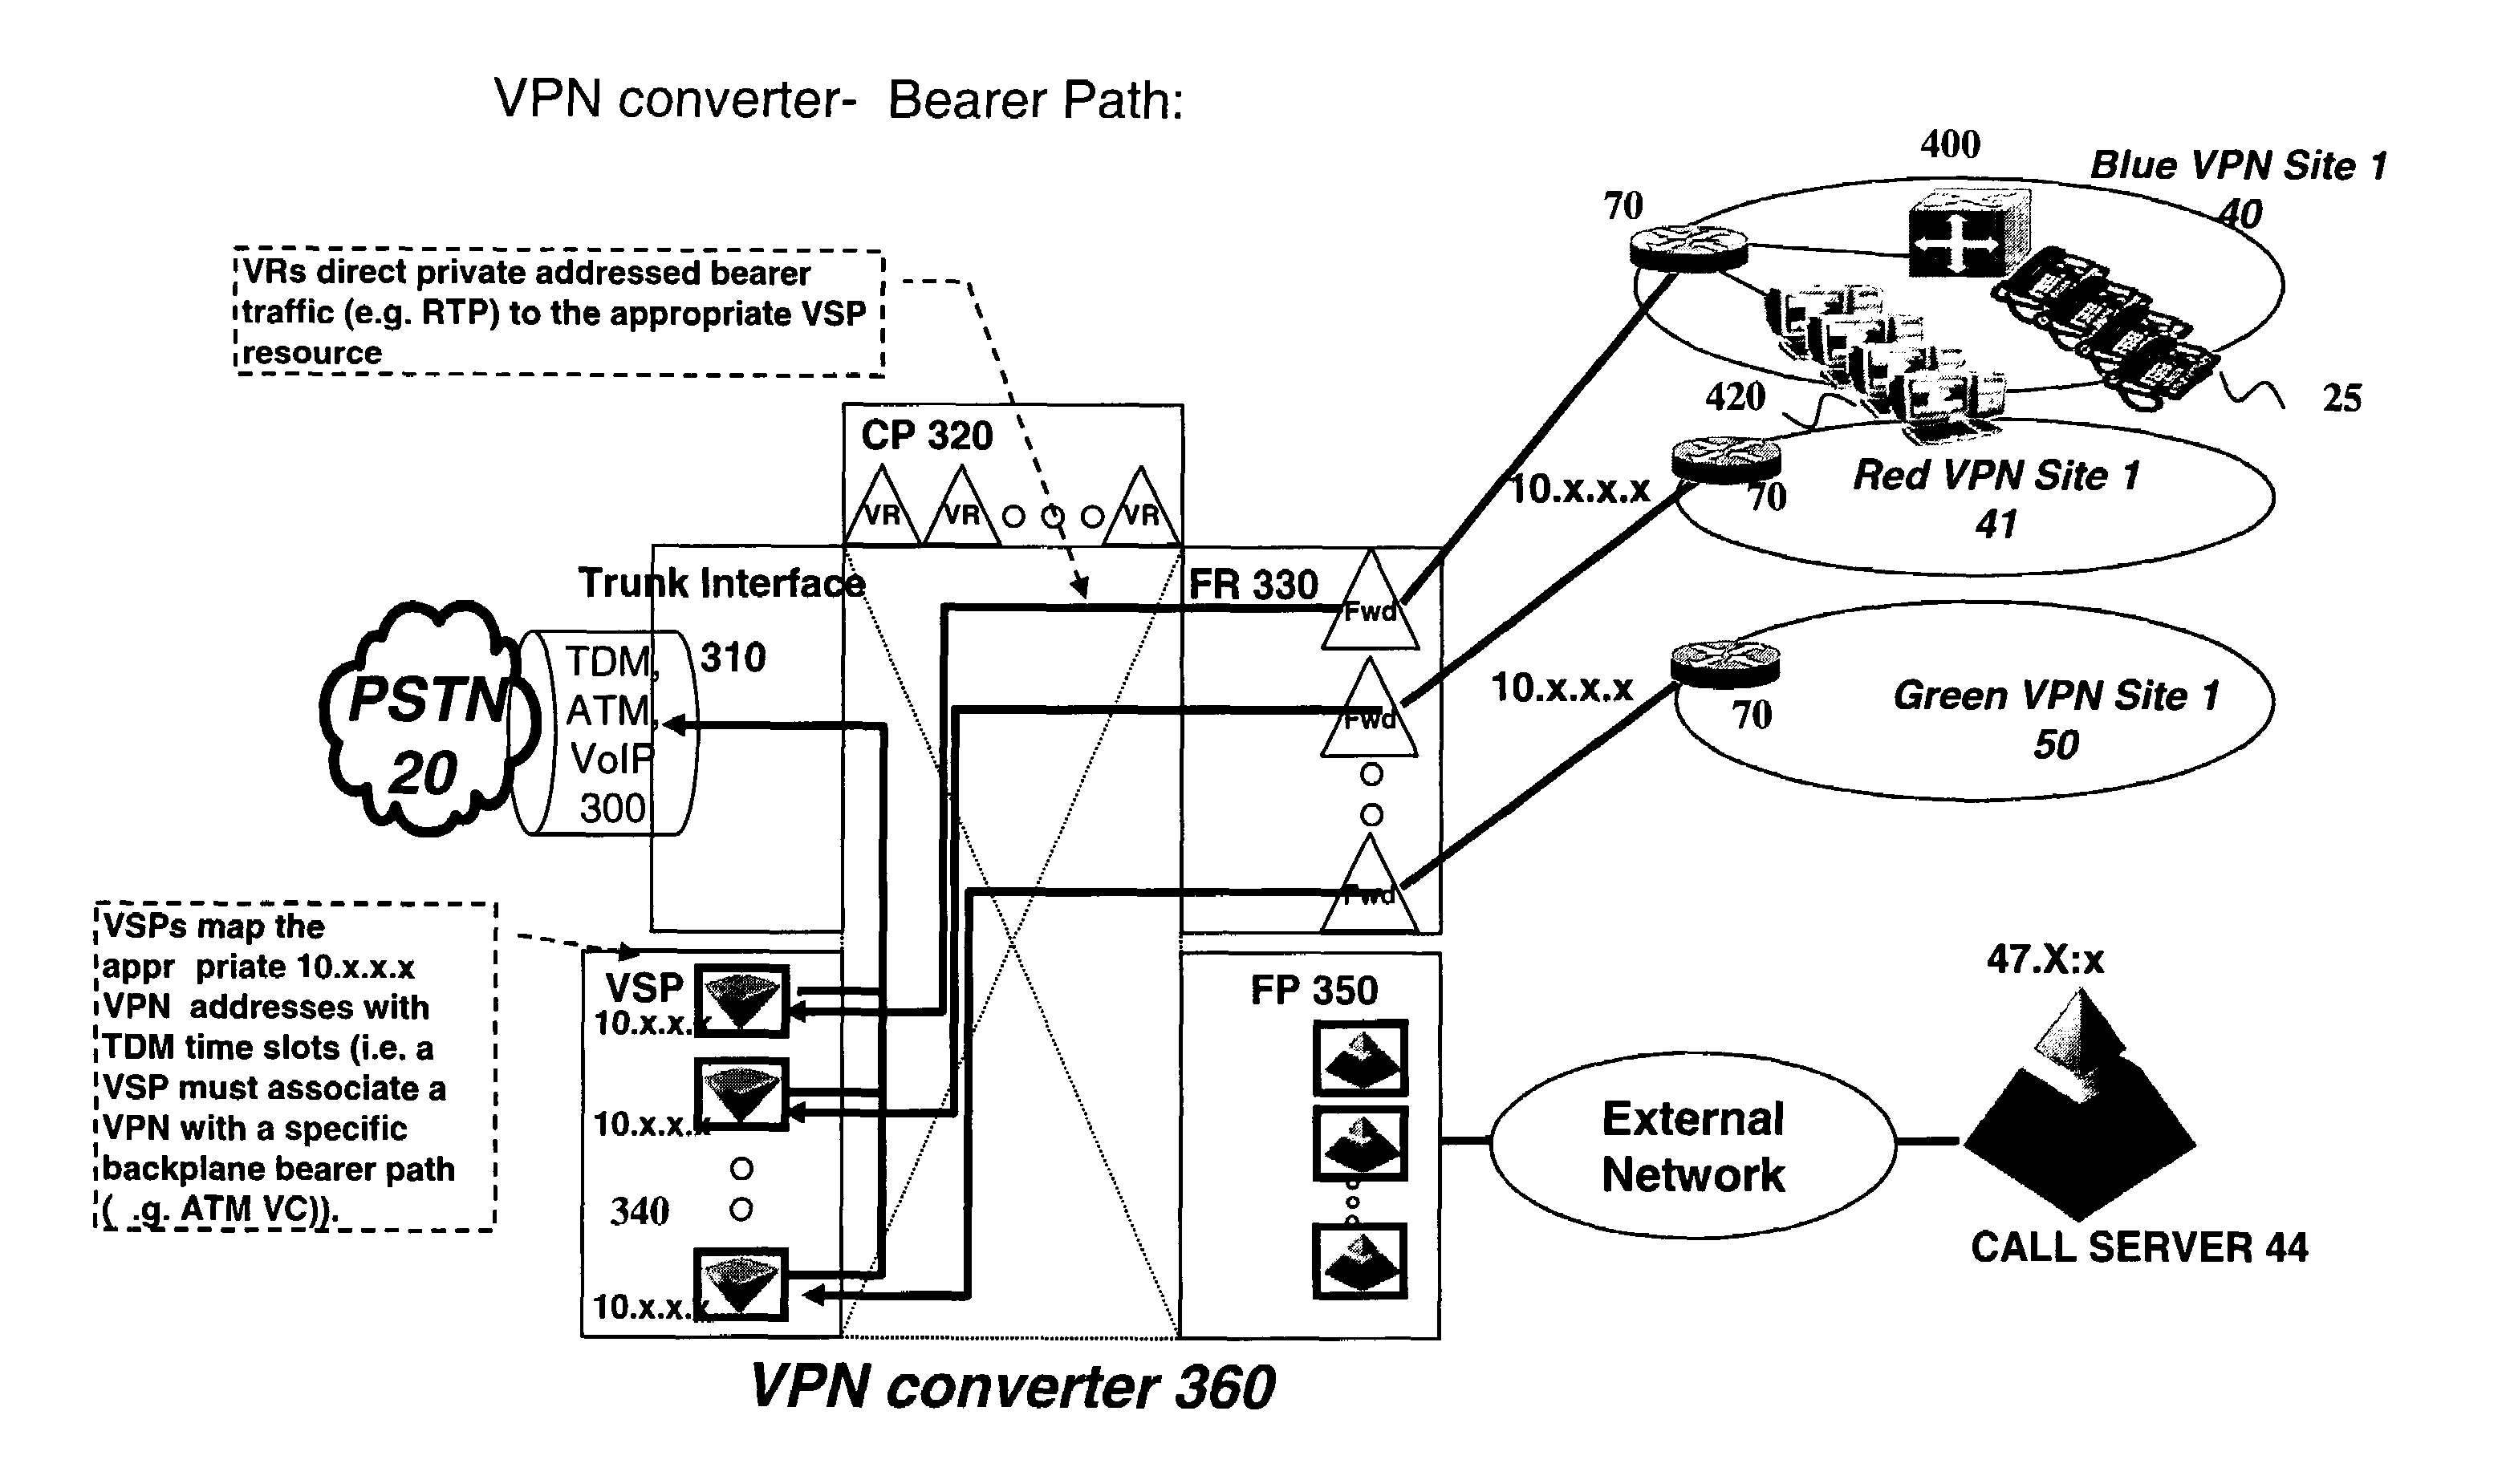 Convertor shared by multiple virtual private networks